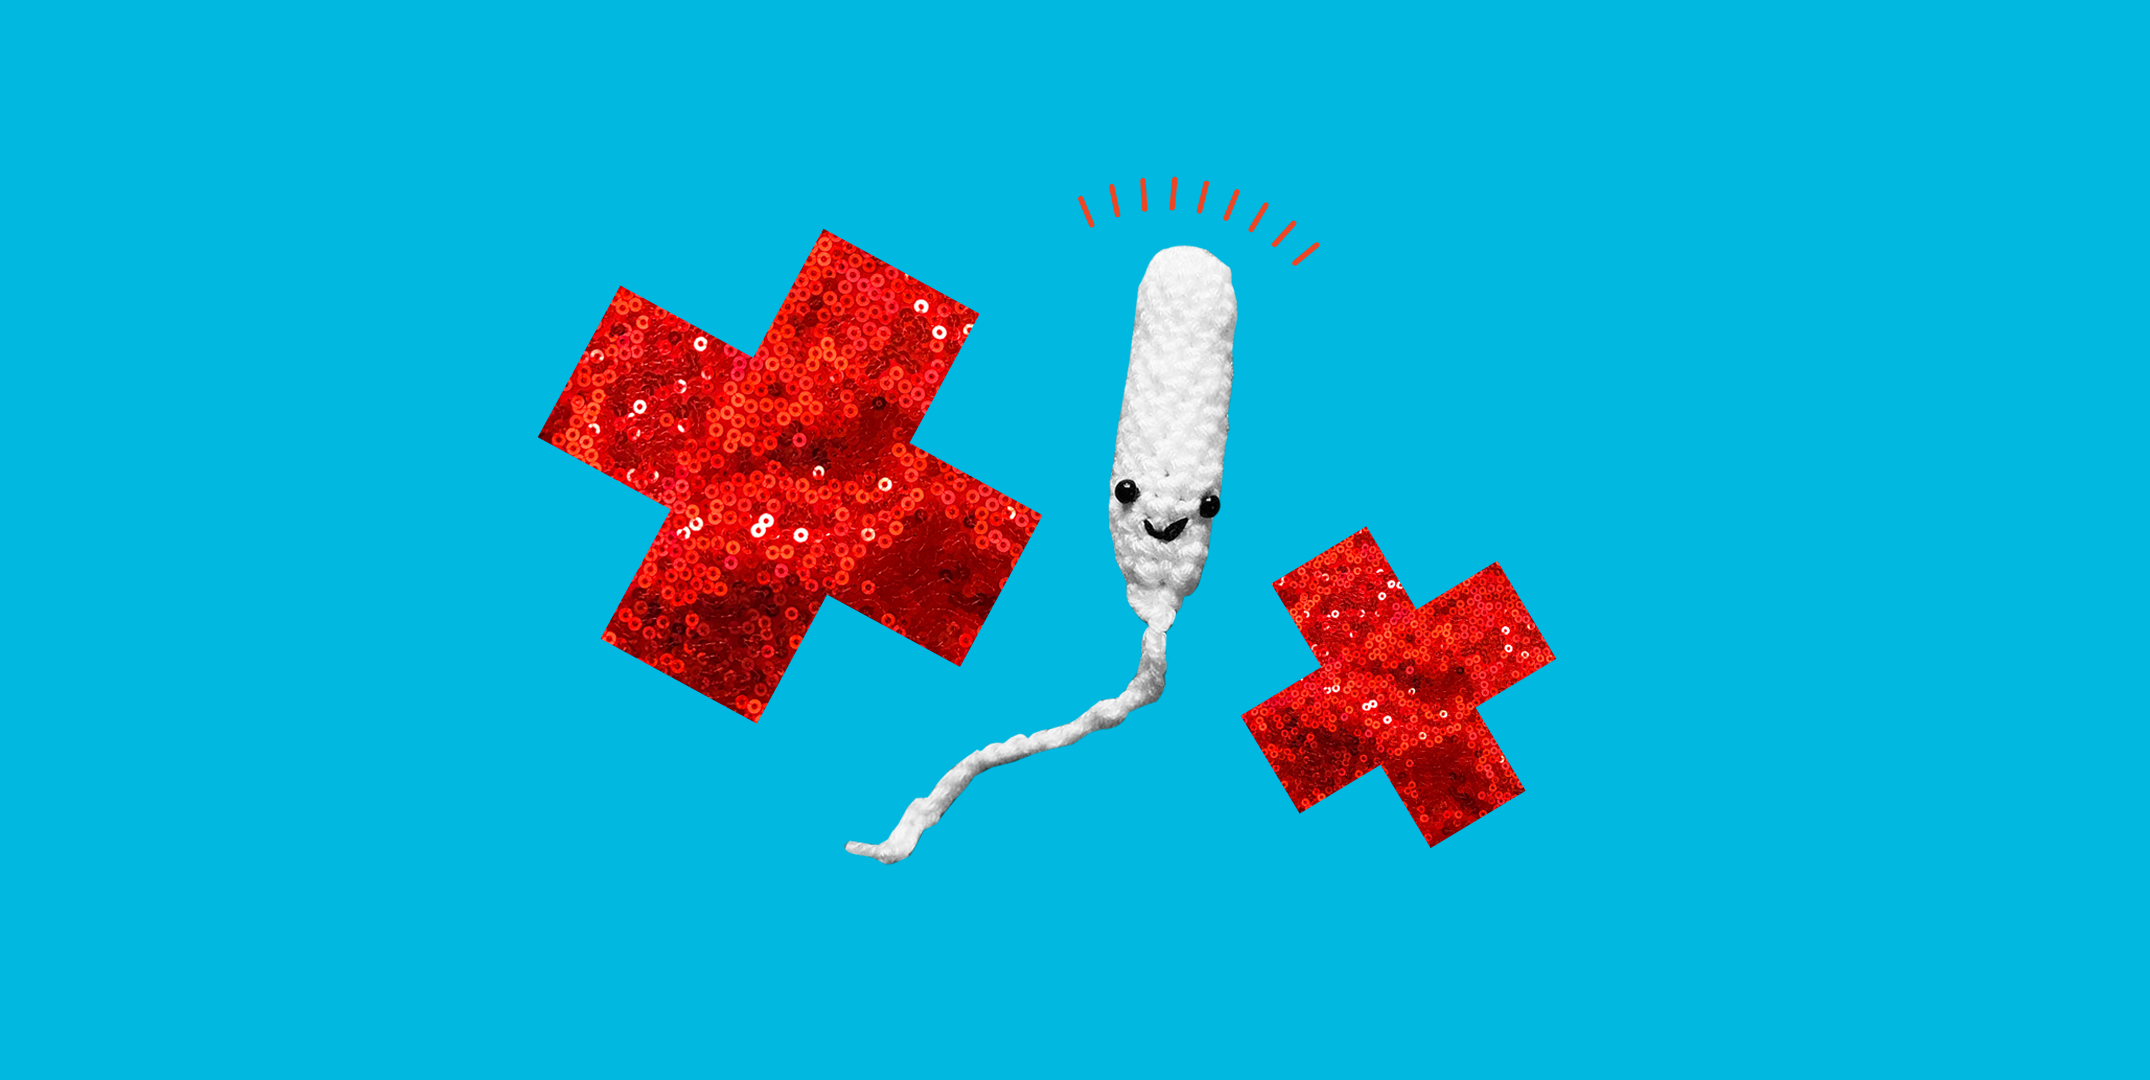 Crocheted and Tampons - Are Safe? No.